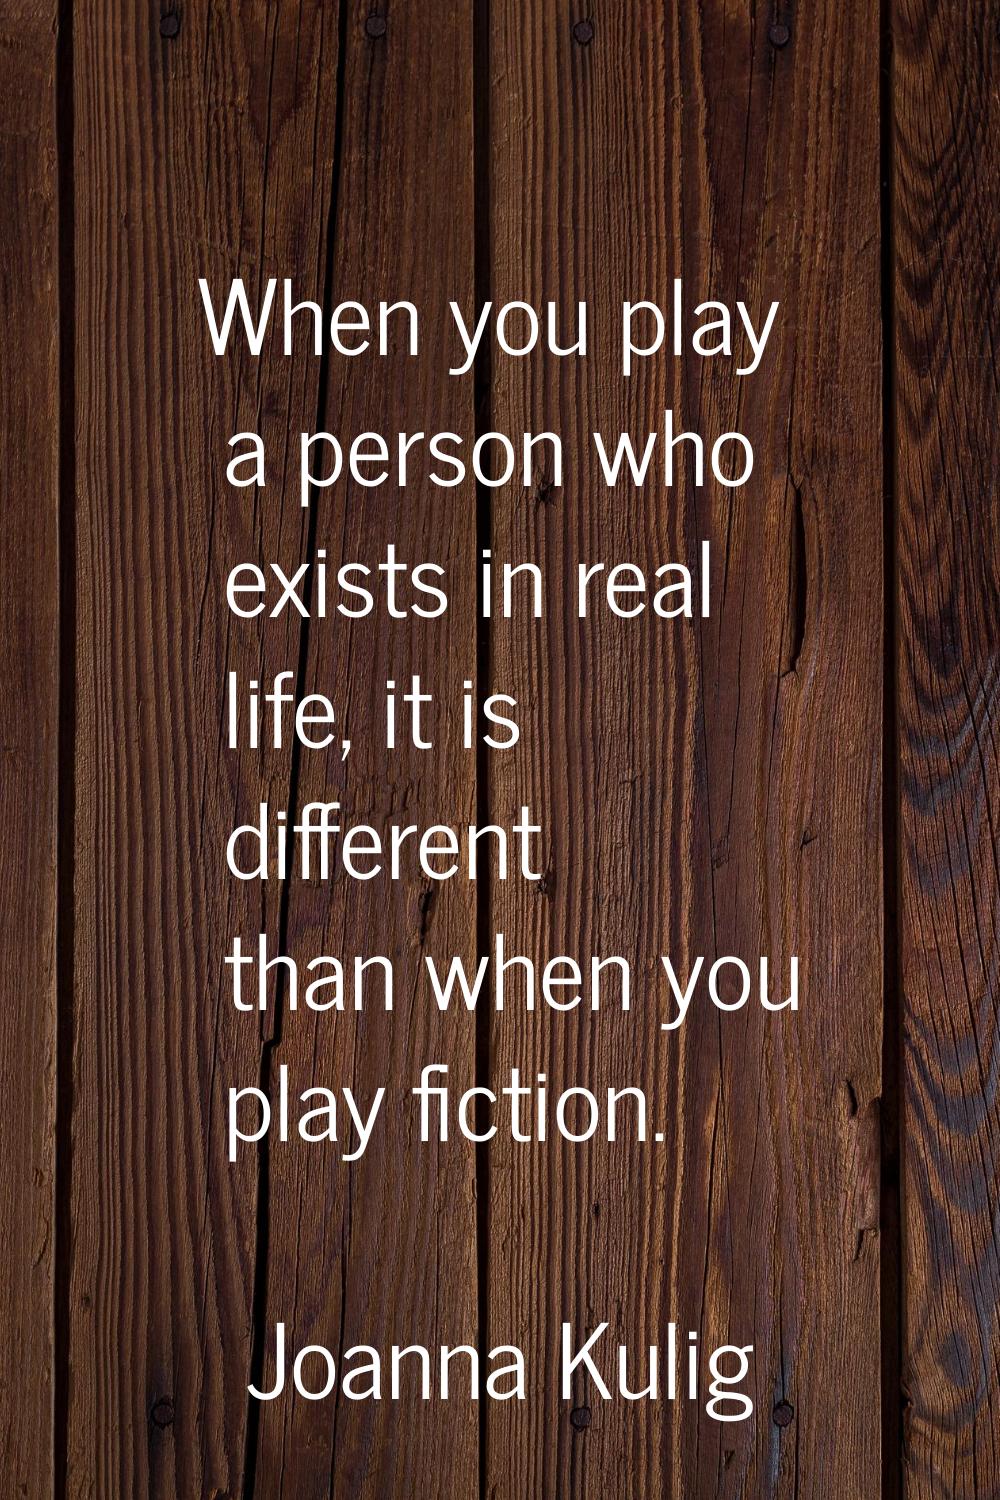 When you play a person who exists in real life, it is different than when you play fiction.